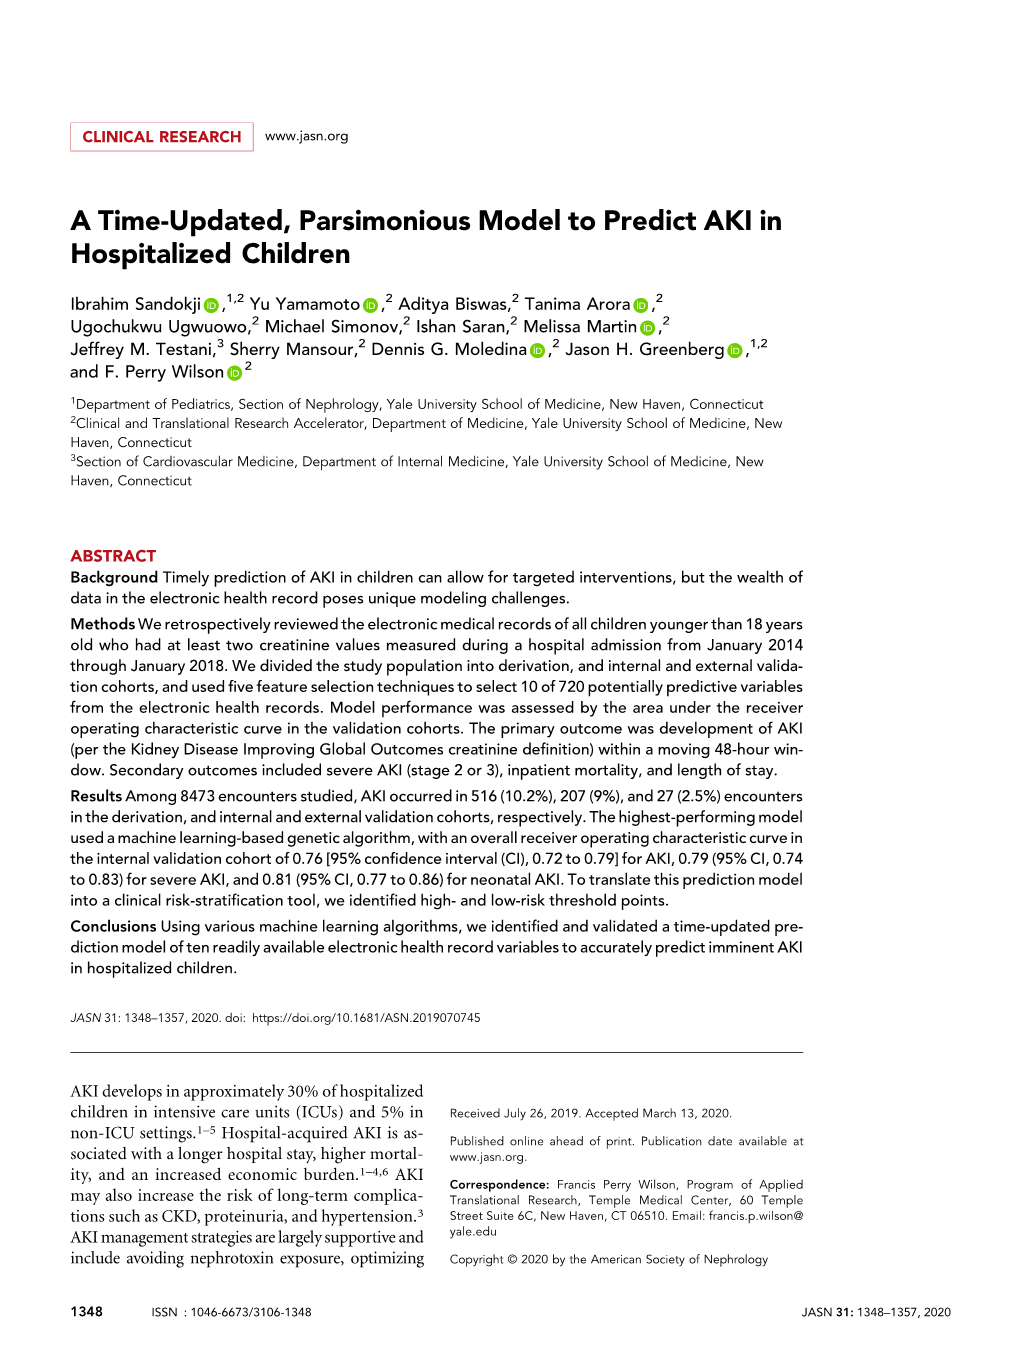 A Time-Updated, Parsimonious Model to Predict AKI in Hospitalized Children